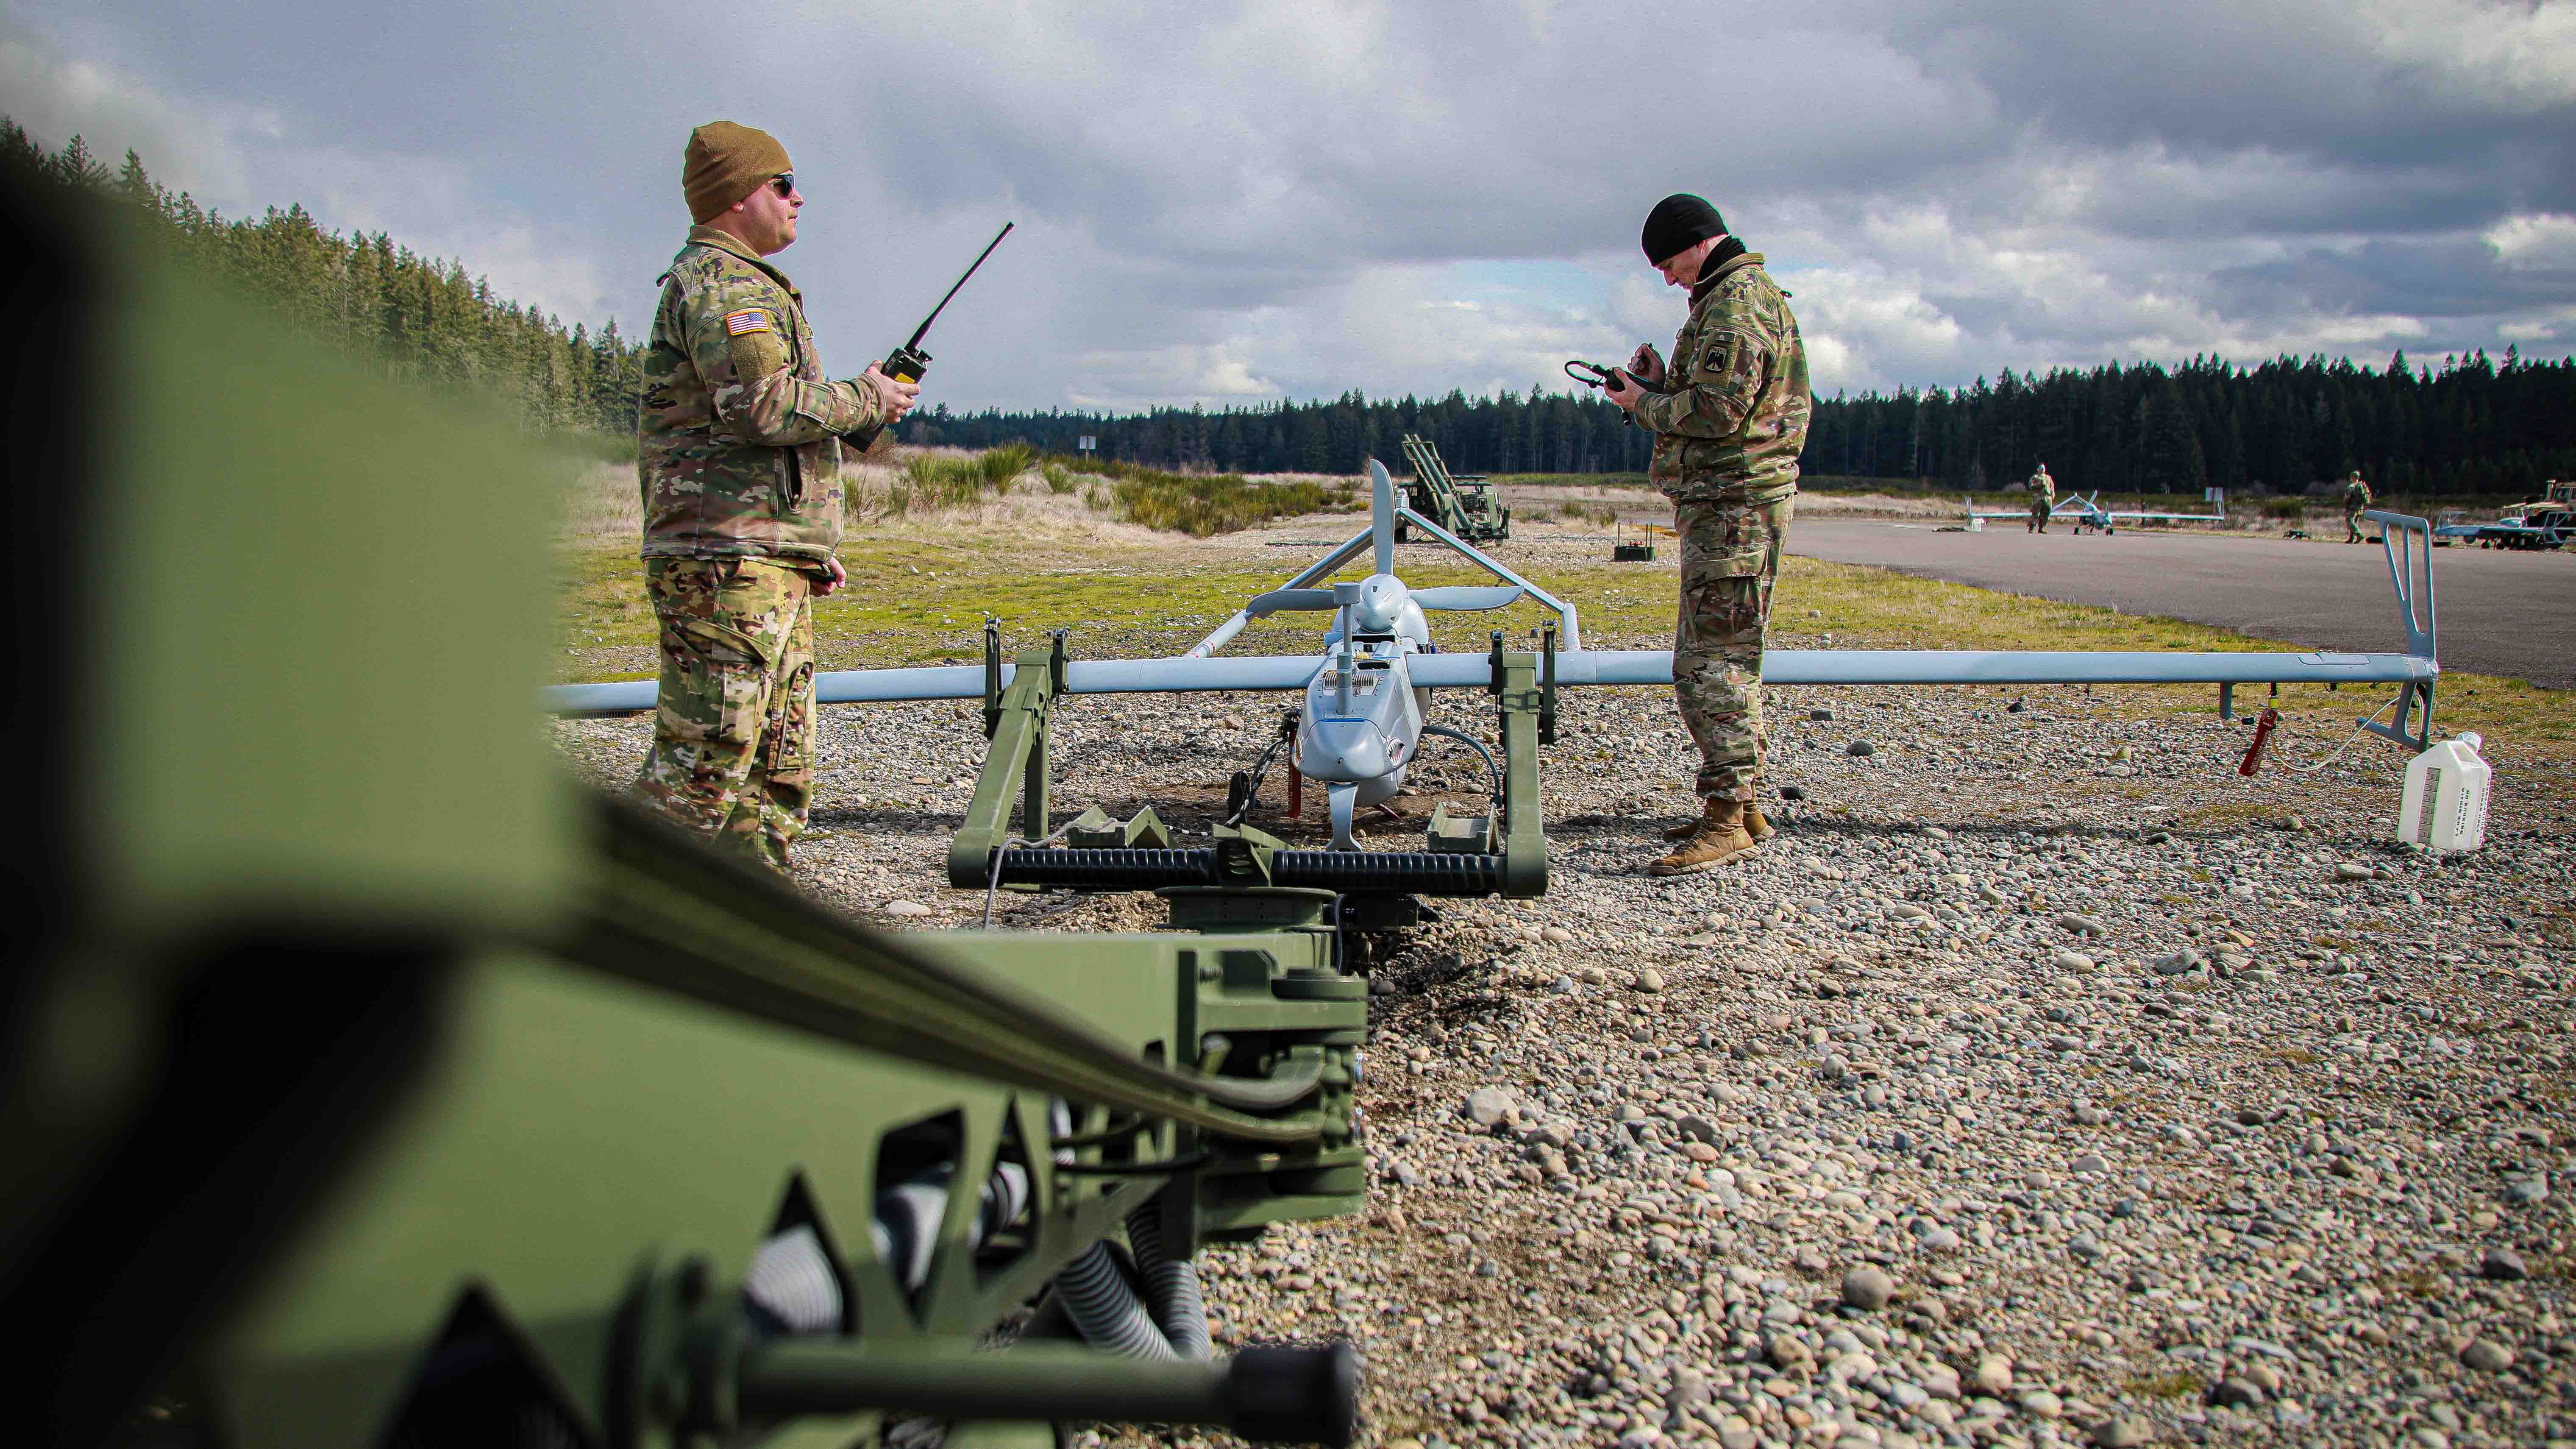 Troopers assigned to 4-6 Air Cavalry Squadron, 16th Combat Aviation Brigade, discuss preflight operations of the RQ-7B Shadow unmanned aerial system, from the training area of Joint Base Lewis-McChord, Wash., April 19, 2023. (U.S. Army photo by Sgt. Ashunteia’ Smith, 16th Combat Aviation Brigade)